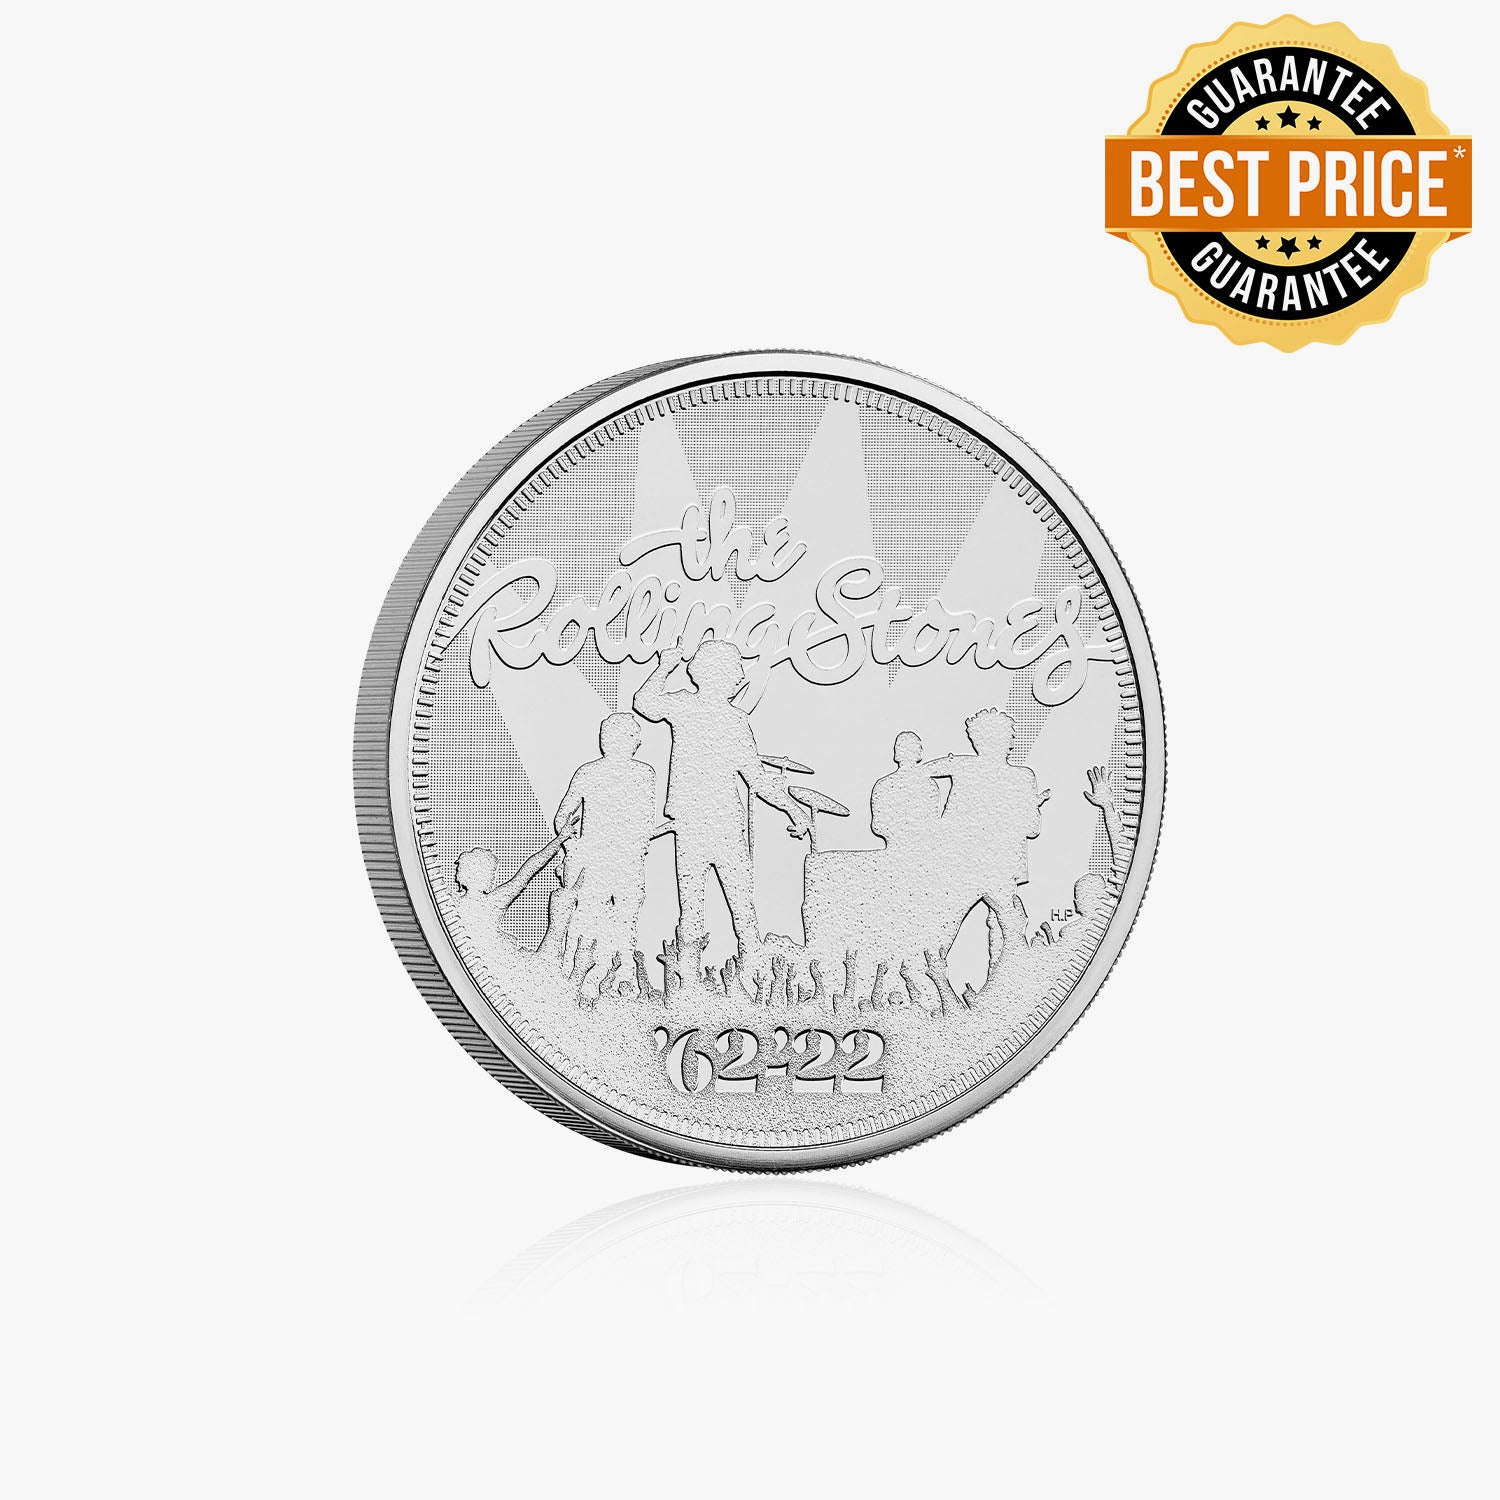 The Music Legends - The Rolling Stones 2022 Brilliant Uncirculated £5 Coin